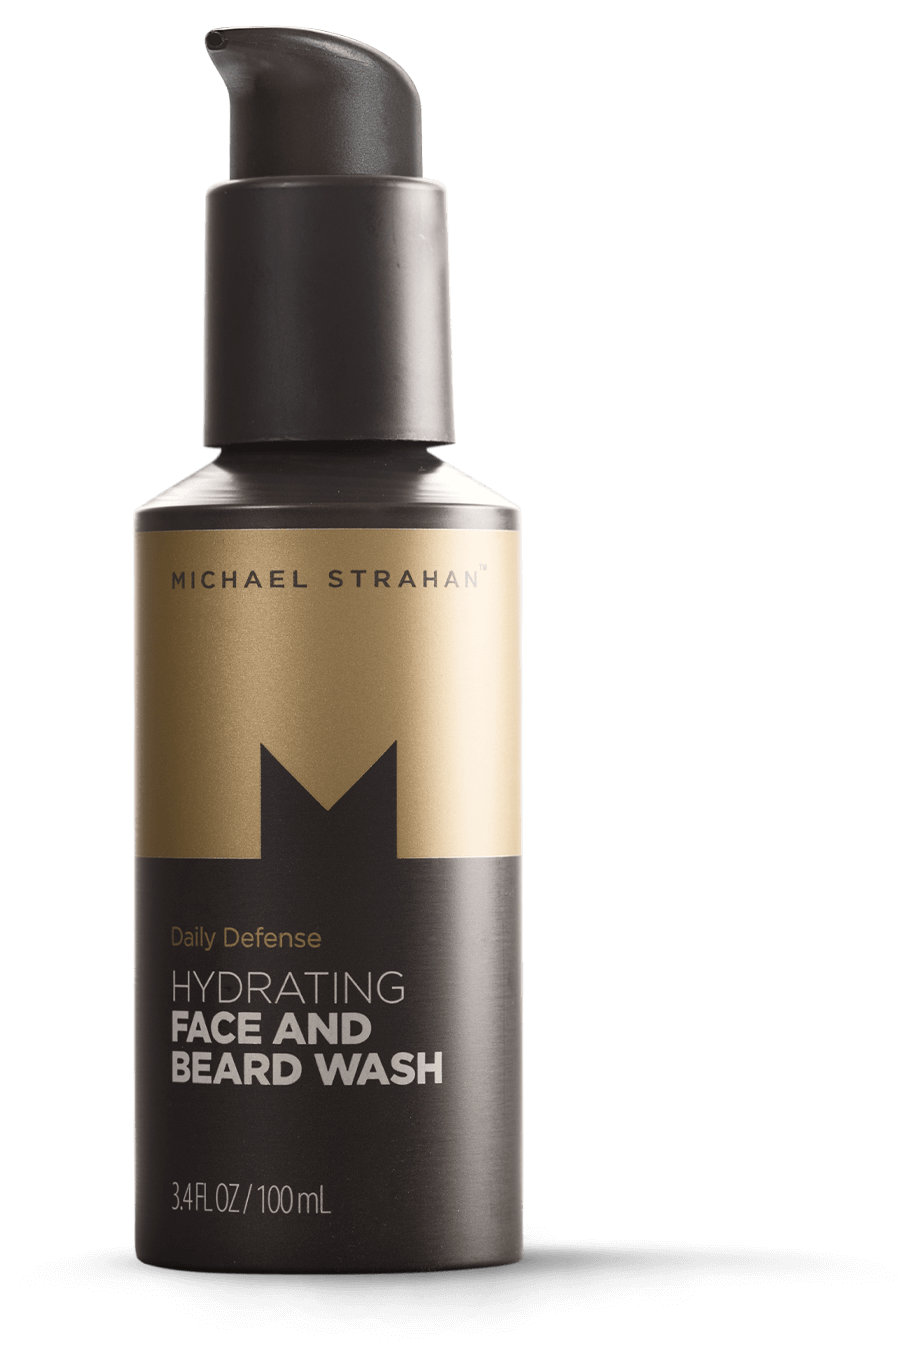 Hydrating Face And Beard Wash